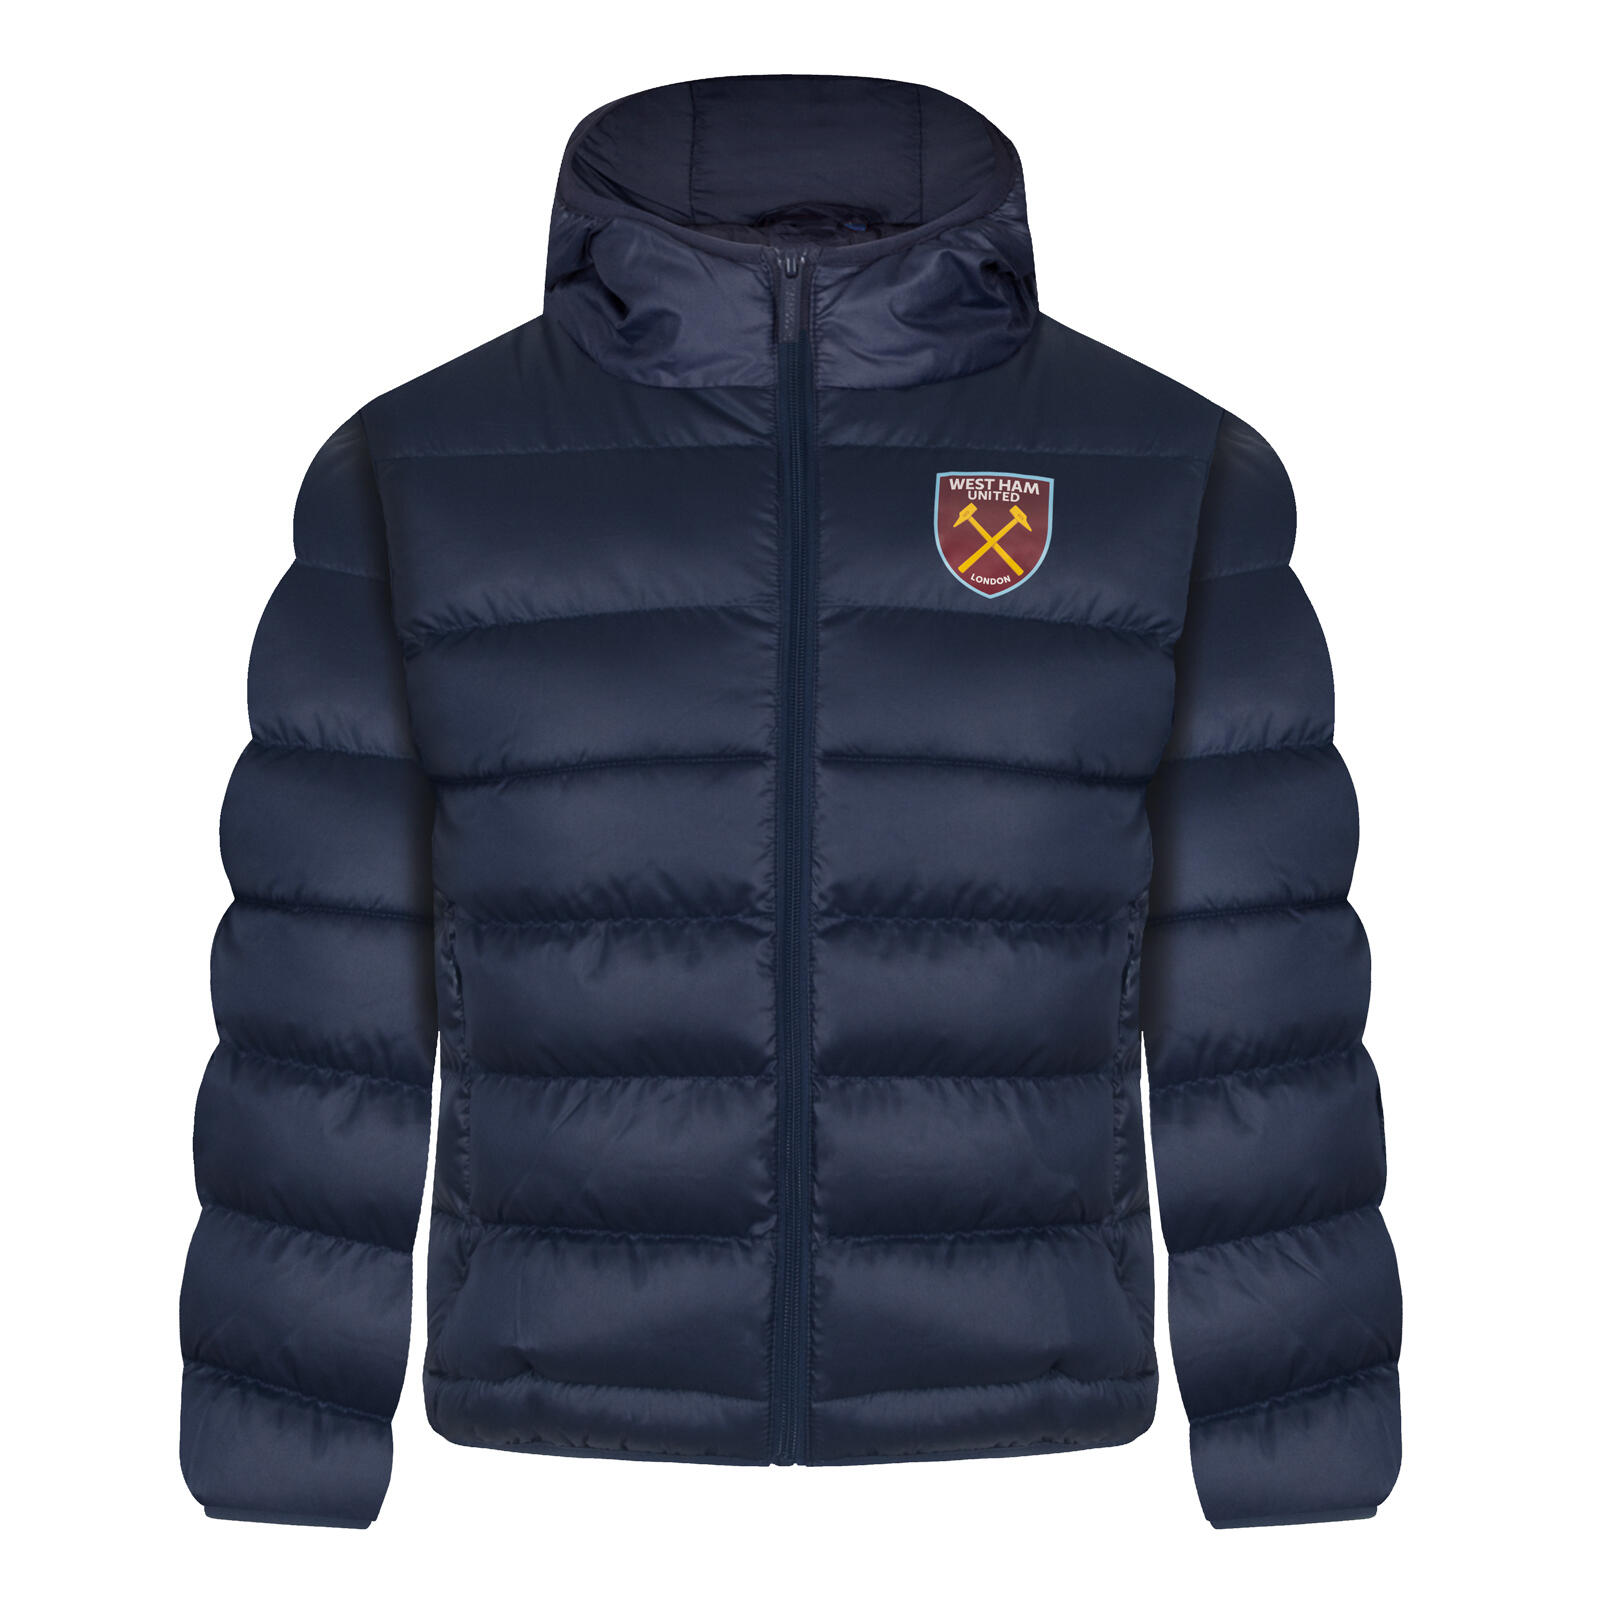 WEST HAM UNITED West Ham United Boys Jacket Hooded Winter Quilted Kids OFFICIAL Football Gift